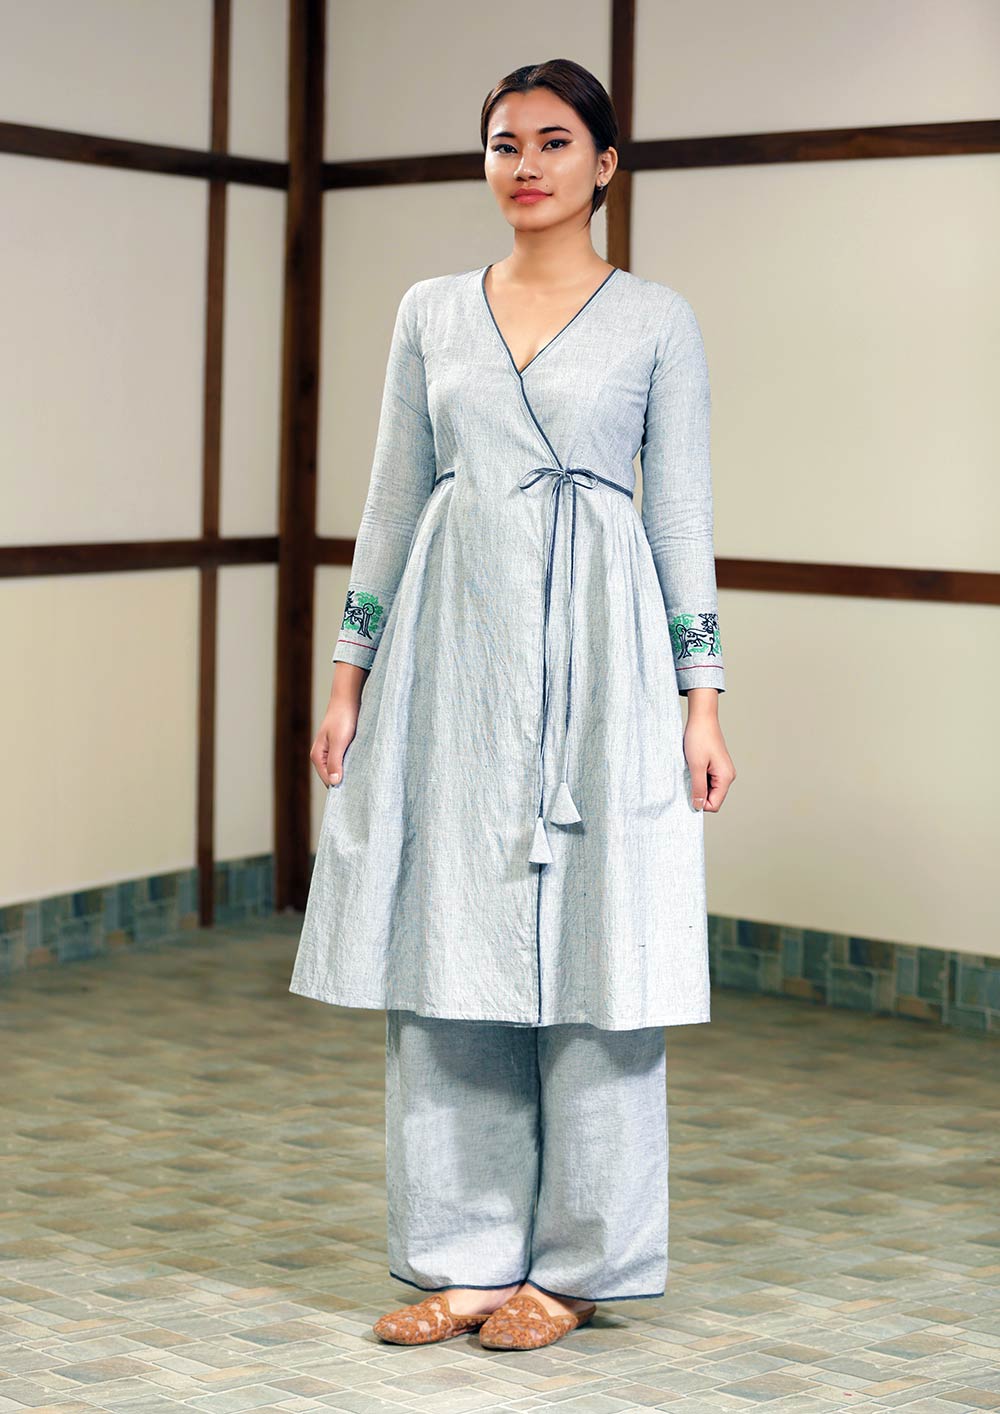 Handwoven cotton Tie-up tunic dress, full sleeves designed by Khumanthem Atelier